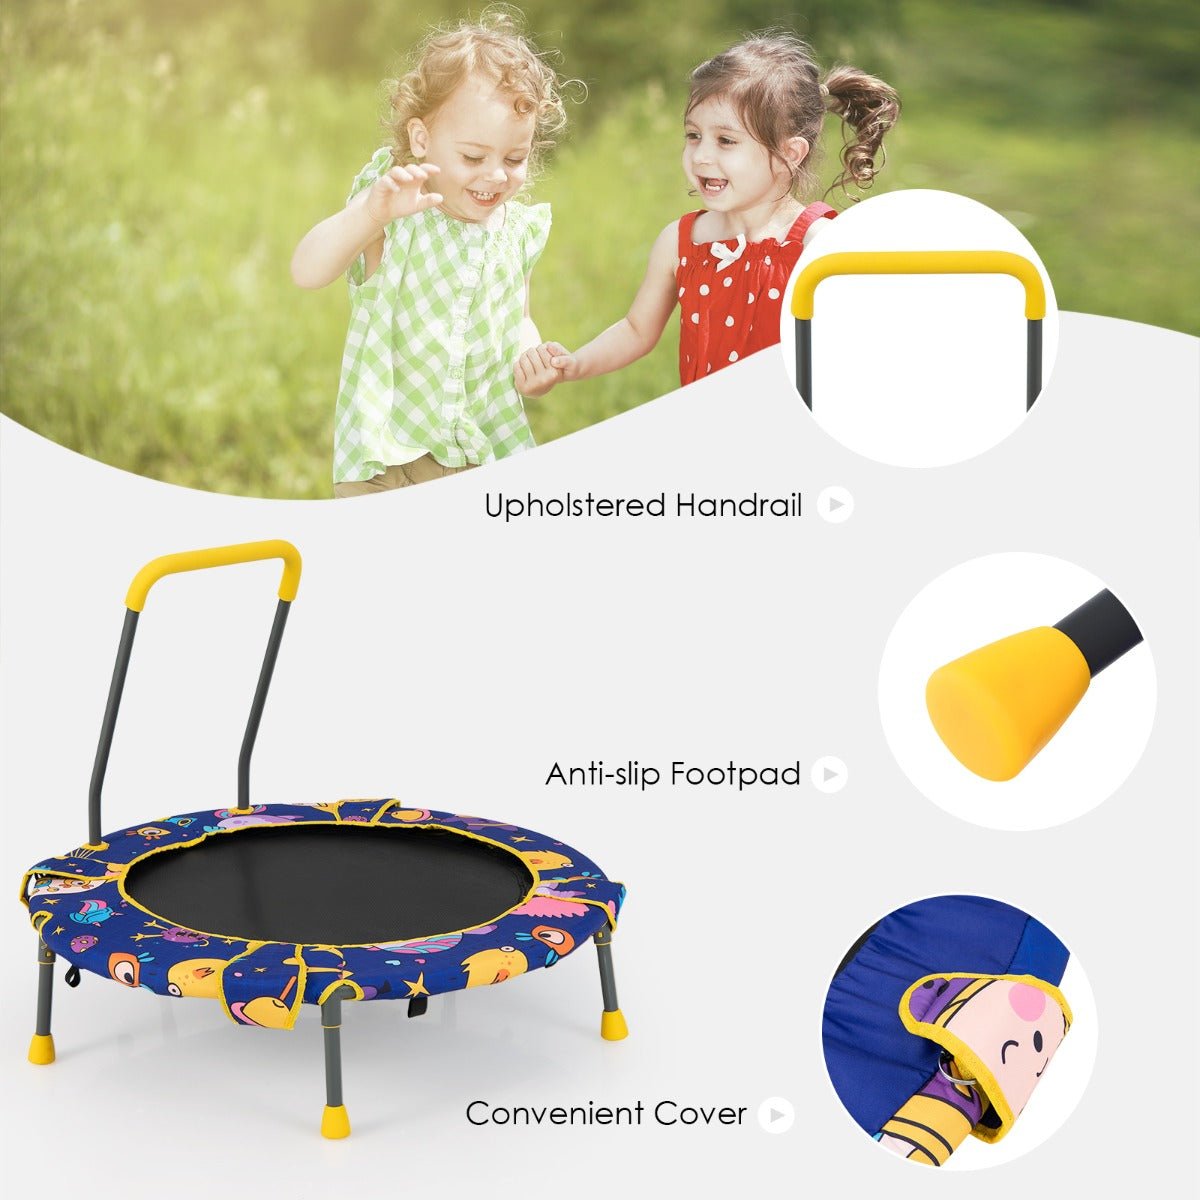 Bounce and Swing Joy: Convertible Swing and Trampoline Set with Upholstered Handrail for Kids